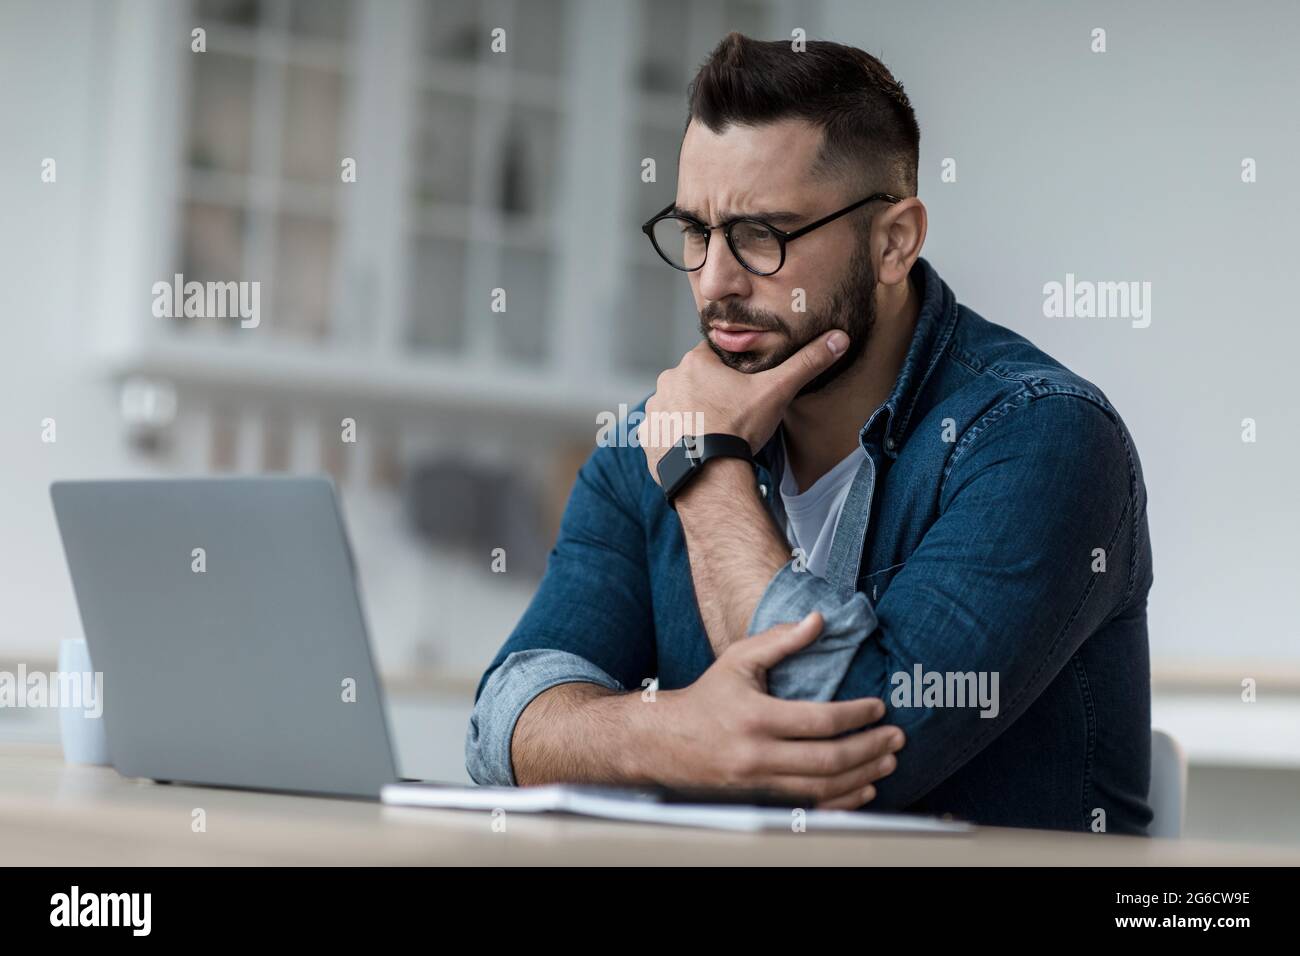 Thoughtful businessman think of online project, look at laptop at workplace, professional consider solution Stock Photo